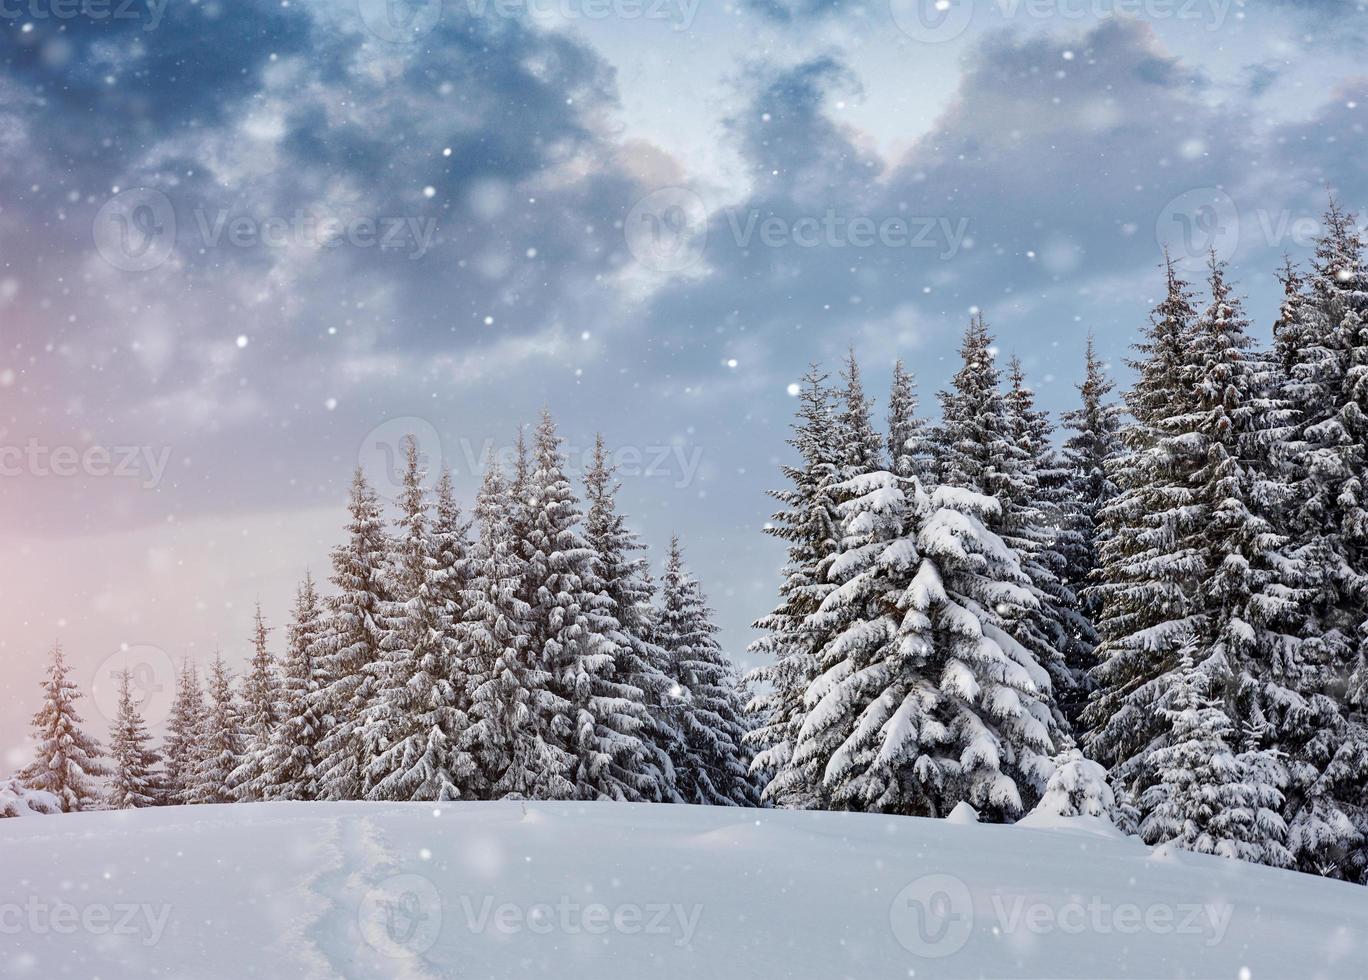 winter landscape trees and fence in hoarfrost, background with some soft highlights and snow flakes. Carpathian mountains, it is snowing. Ukraine, Europe photo